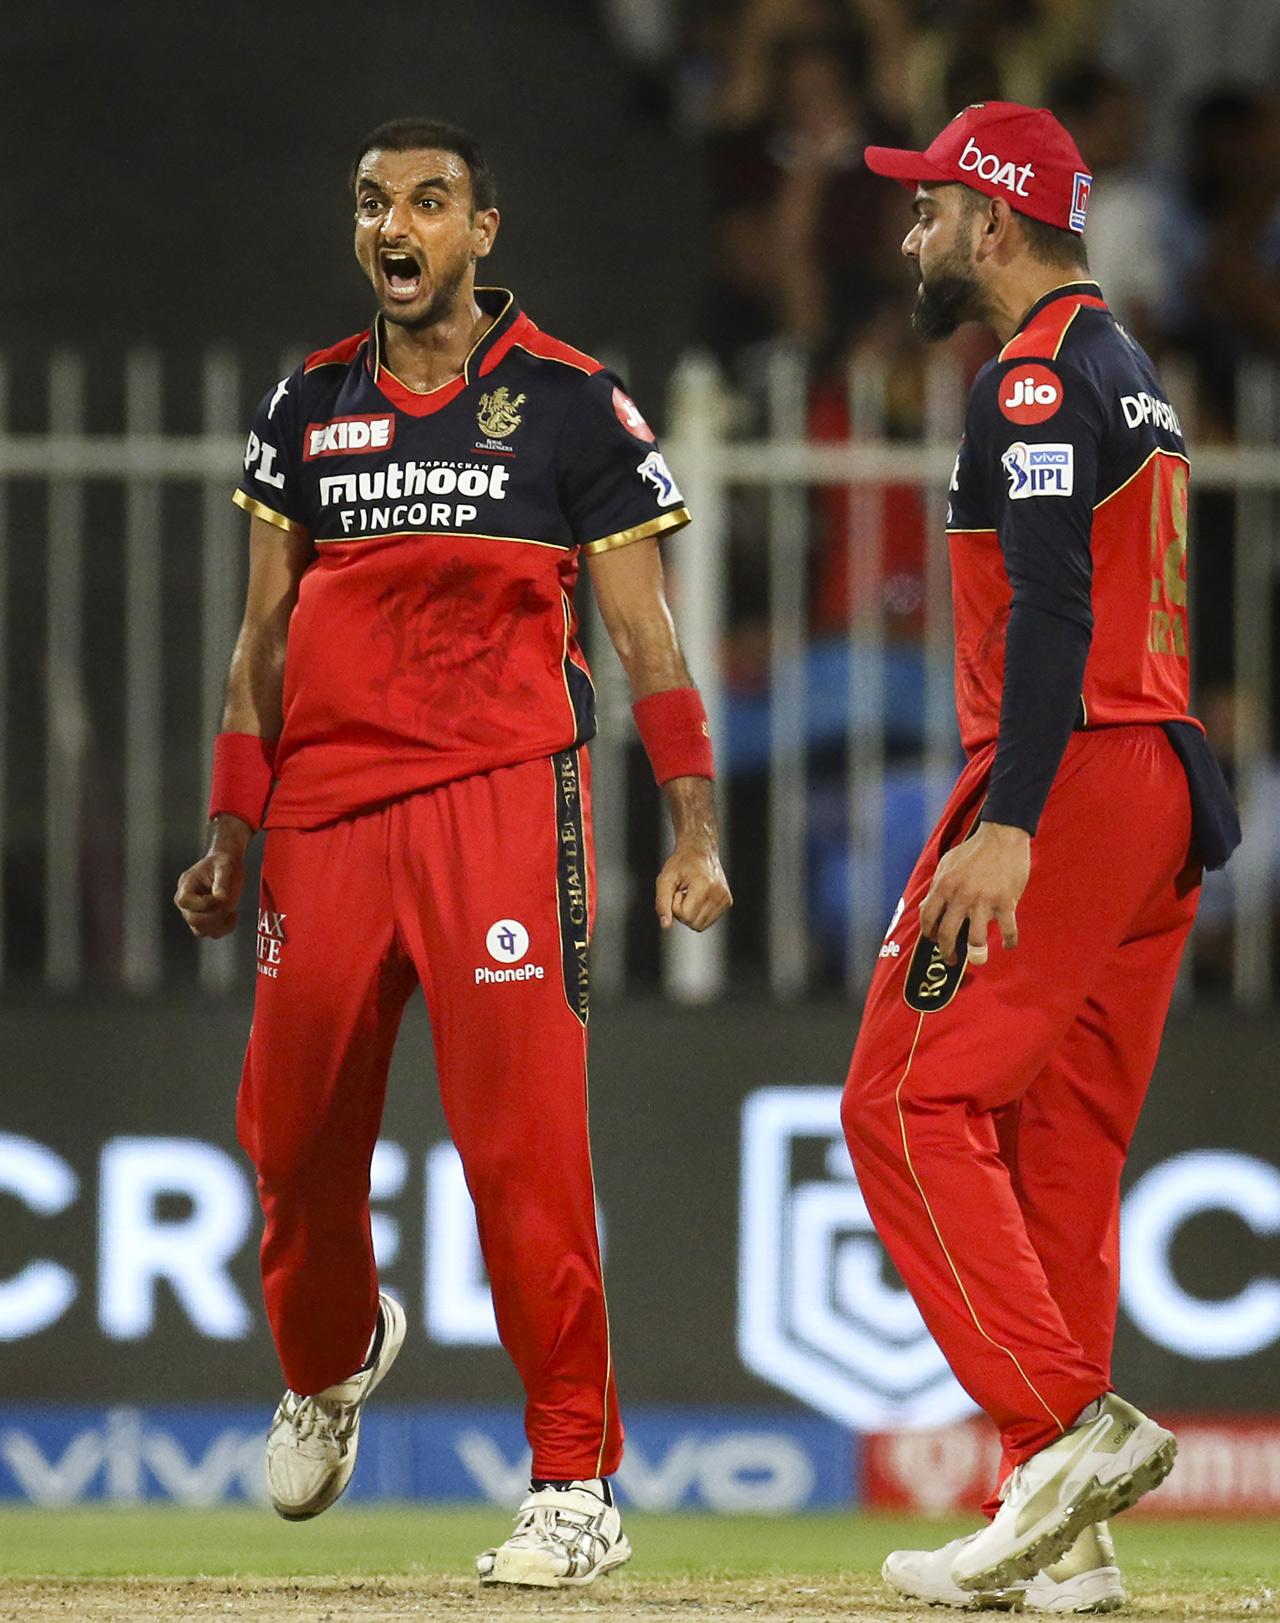 Harshal Patel (Royal Challengers Bangalore) Wickets - 32. Matches - 15. Best bowling - 5/27. Economy rate - 8.14. Average - 14.34